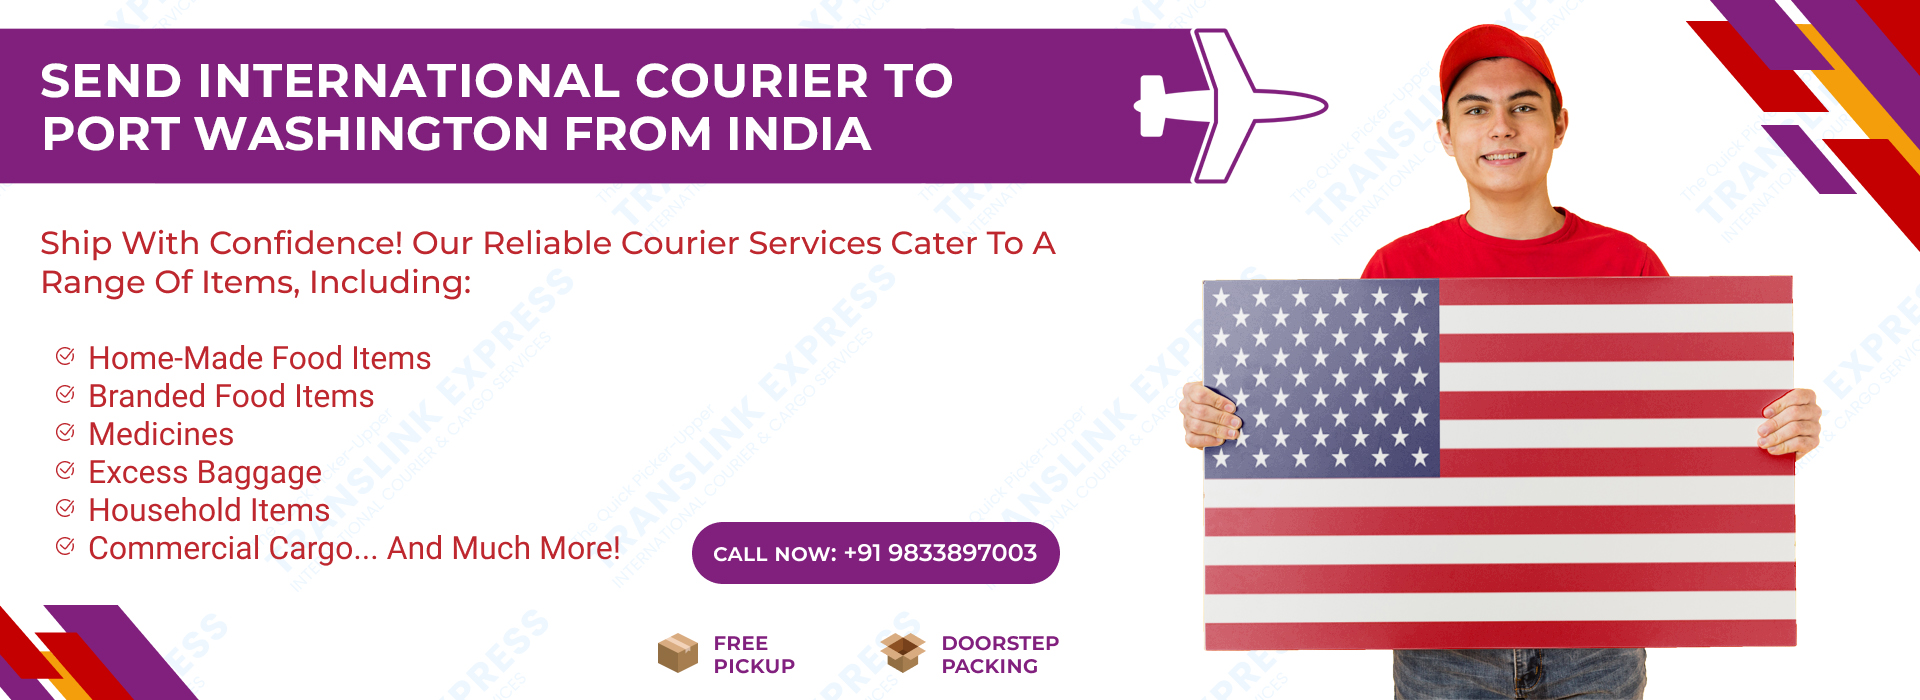 Courier to Port Washington From India